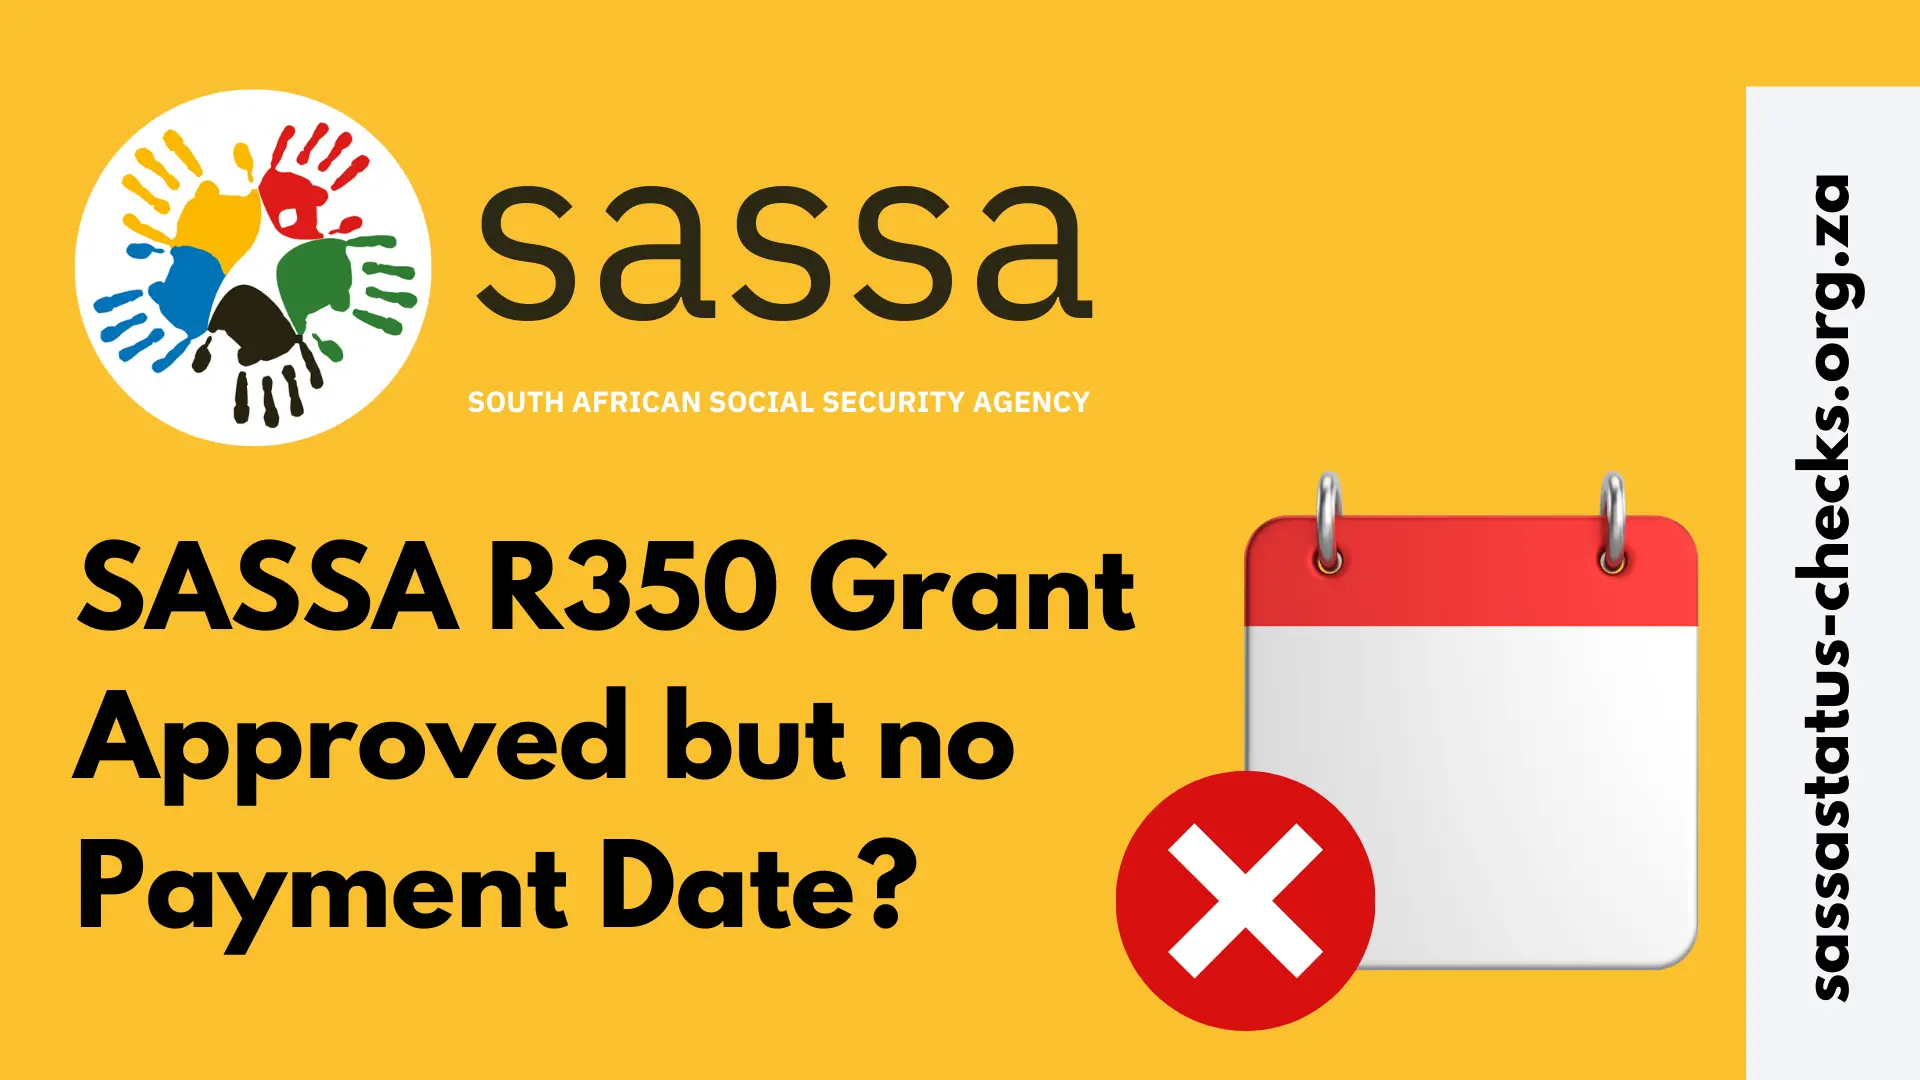 SASSA R350 Grant Approved but no Payment Date